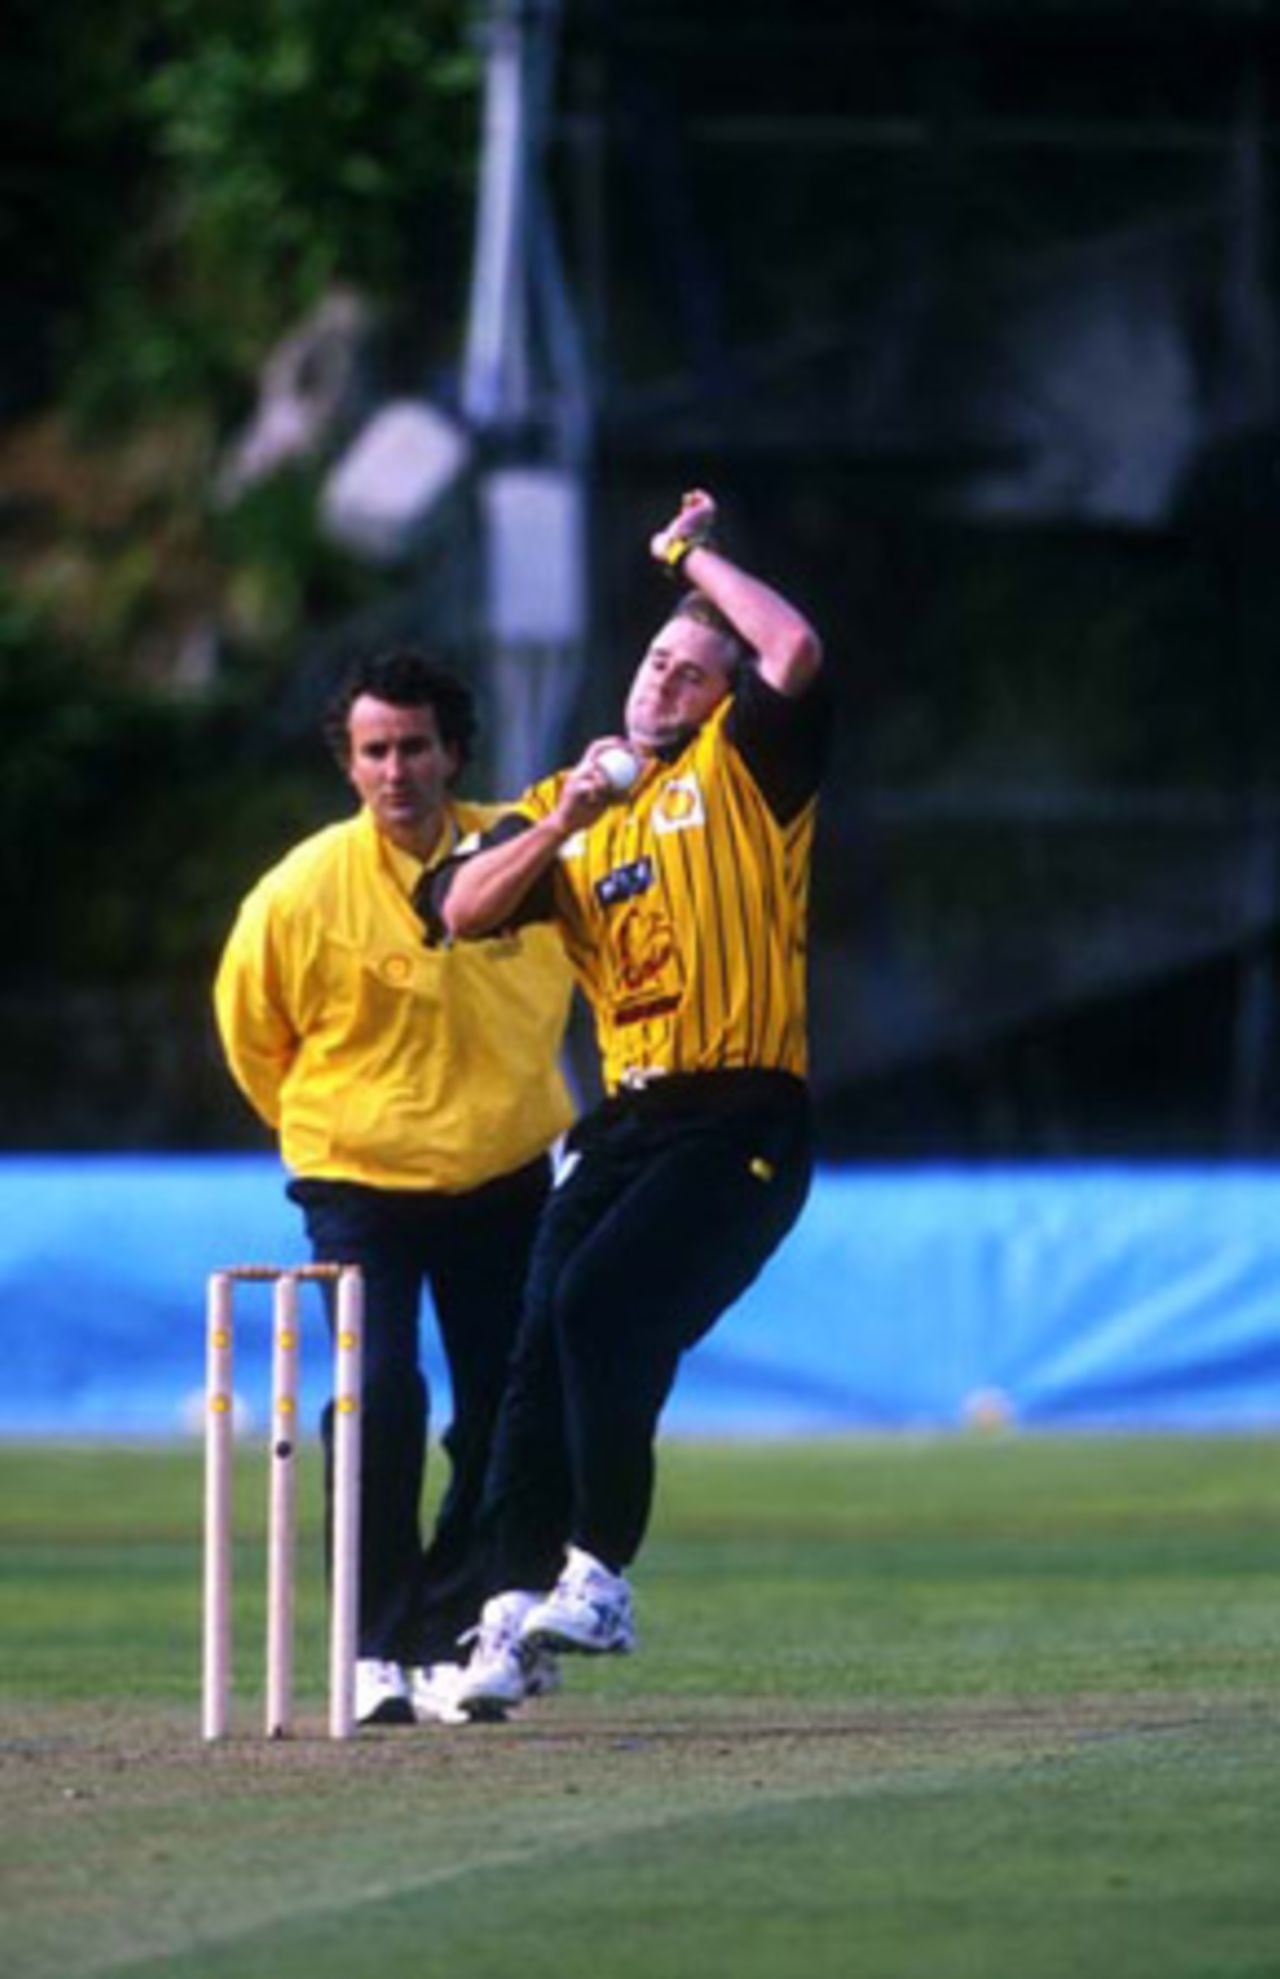 Wellington bowler Paul Hitchcock delivers a ball during his spell of 1-41 from 10 overs. Umpire Brent Bowden looks on. Shell Cup: Auckland v Wellington at Eden Park Outer Oval, Auckland, 27 December 2000.